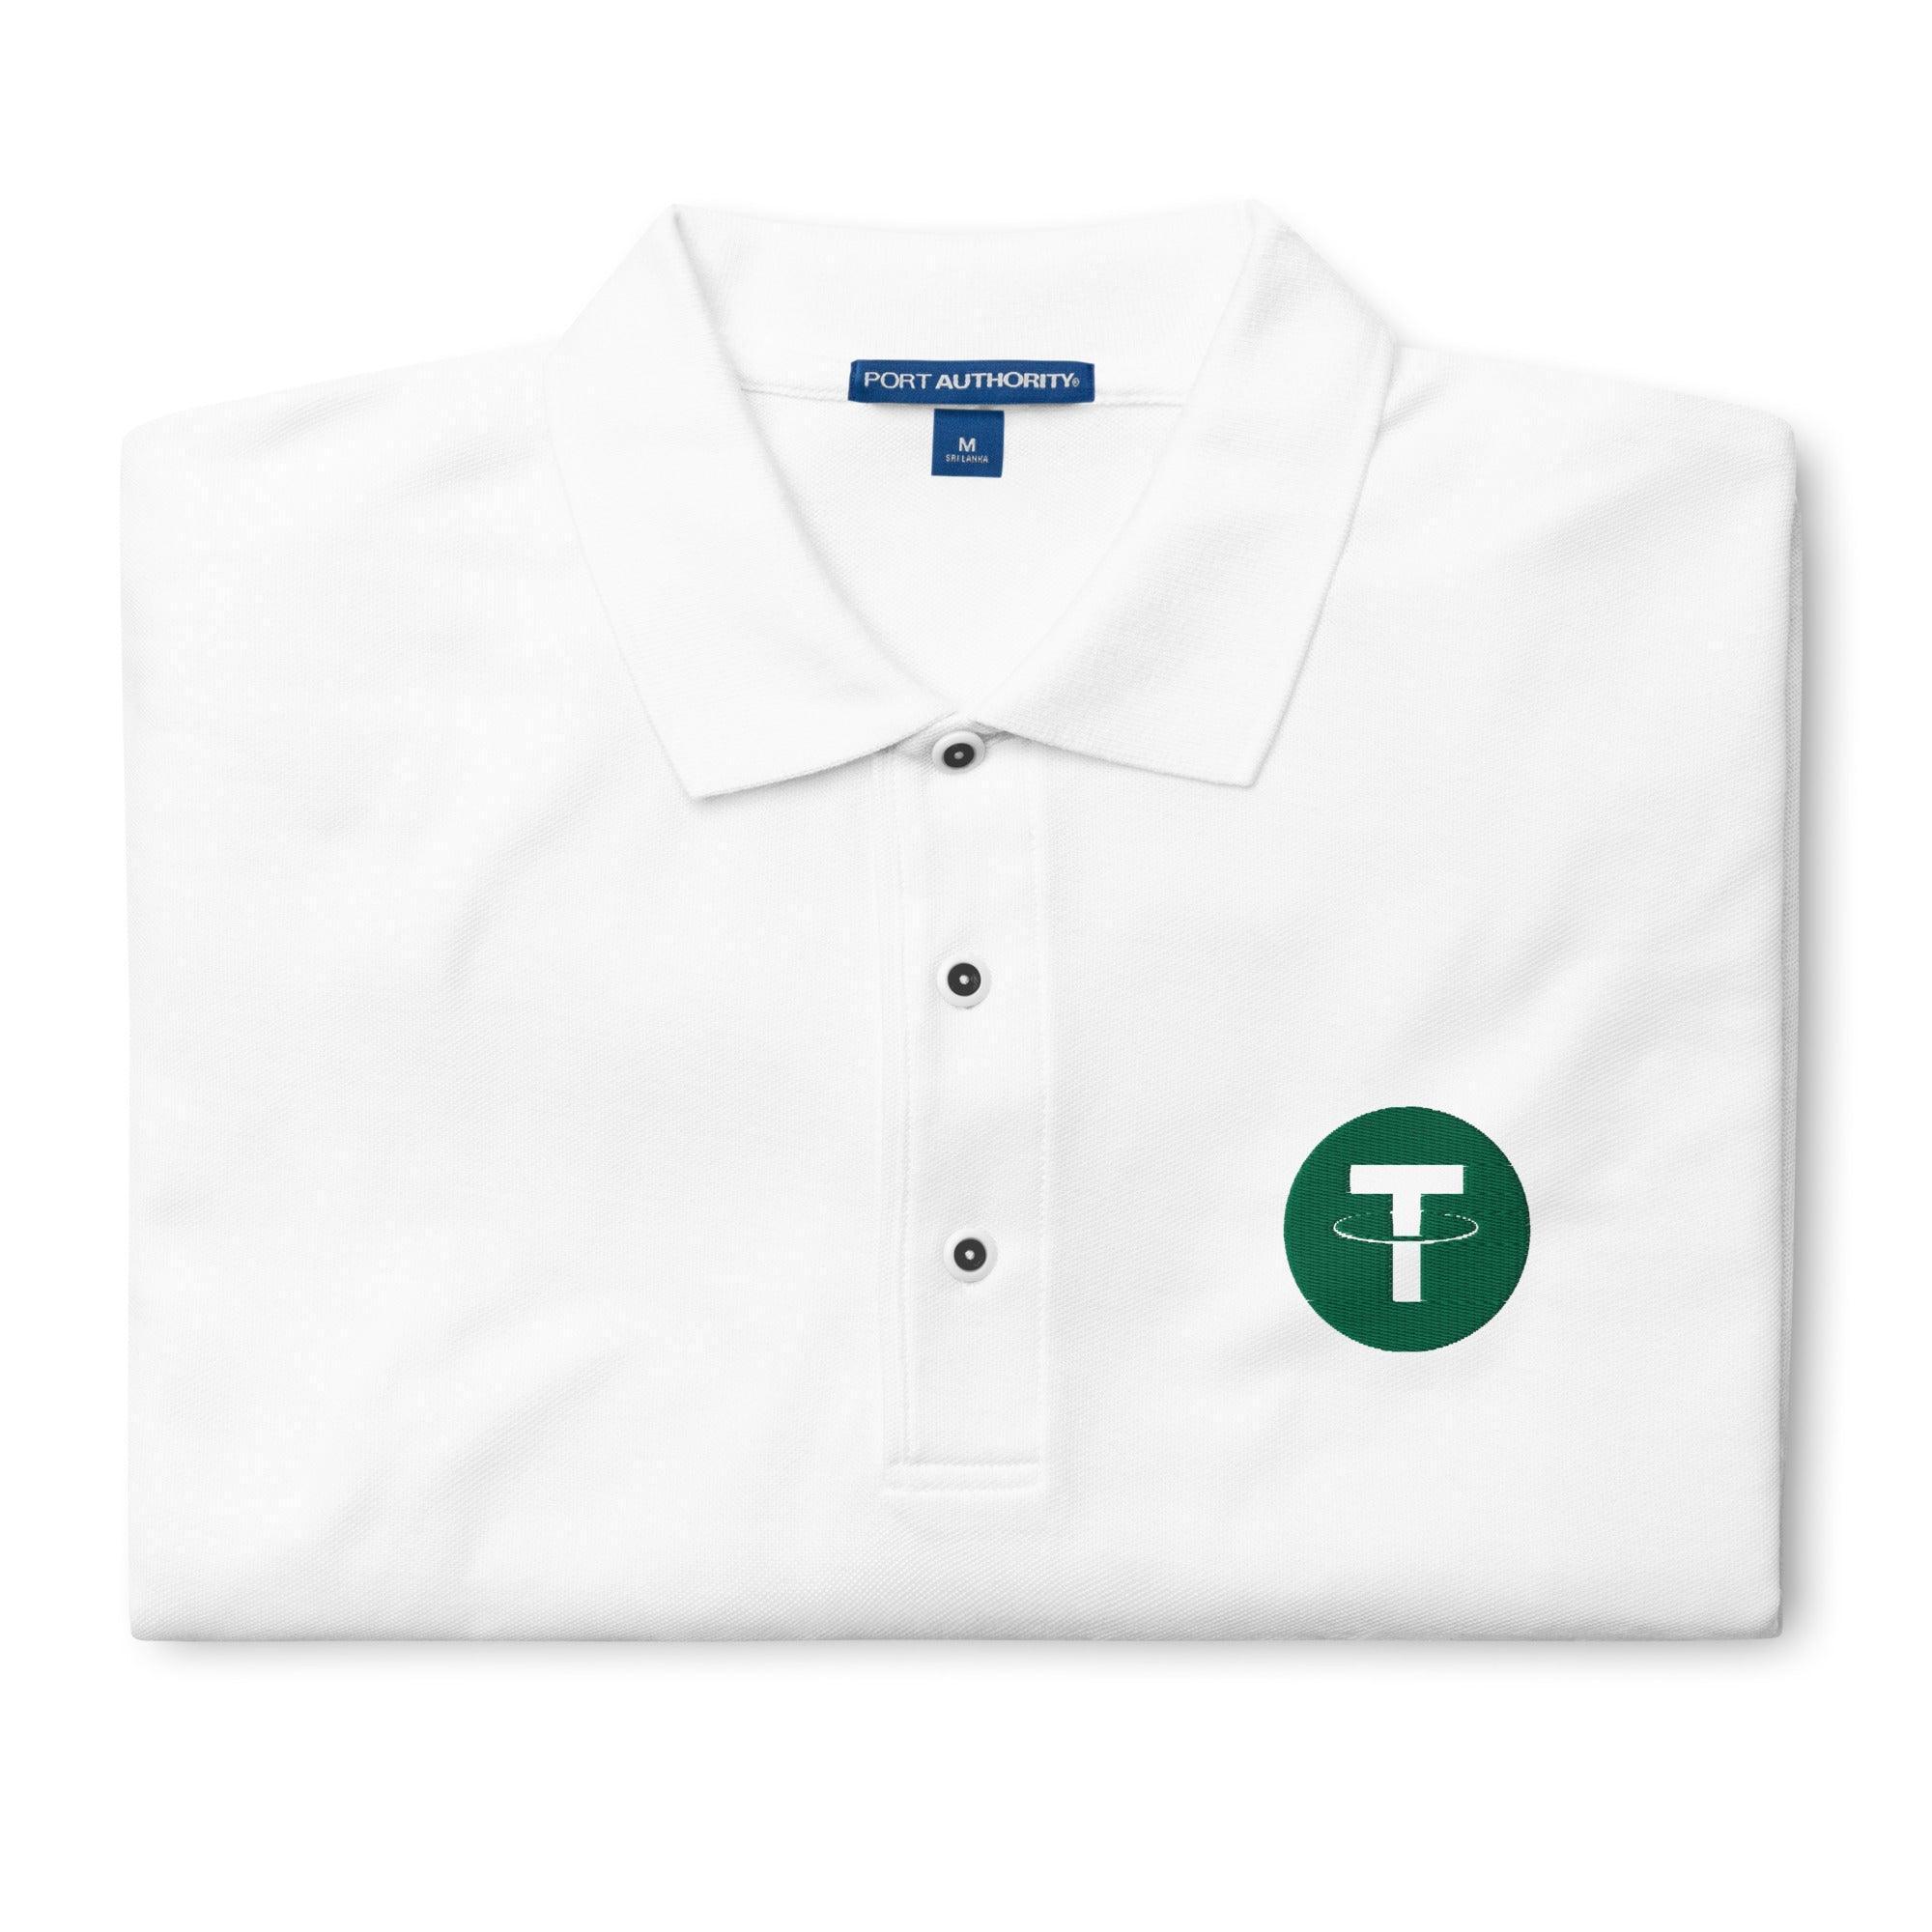 Tether Polo Shirt - InvestmenTees